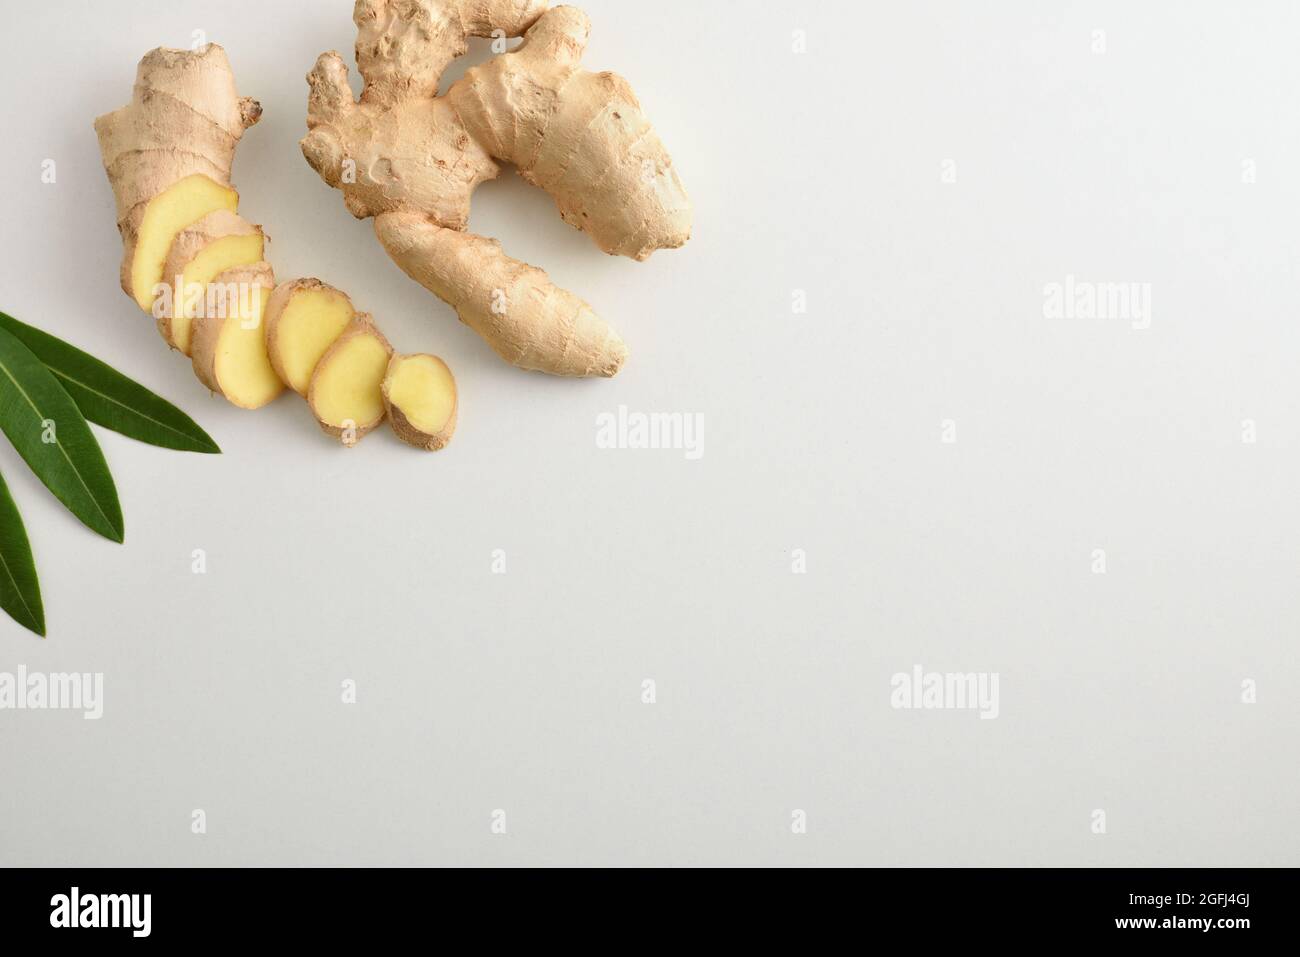 Fresh ginger root with sliced portions on white table and leaves. Top view. Stock Photo